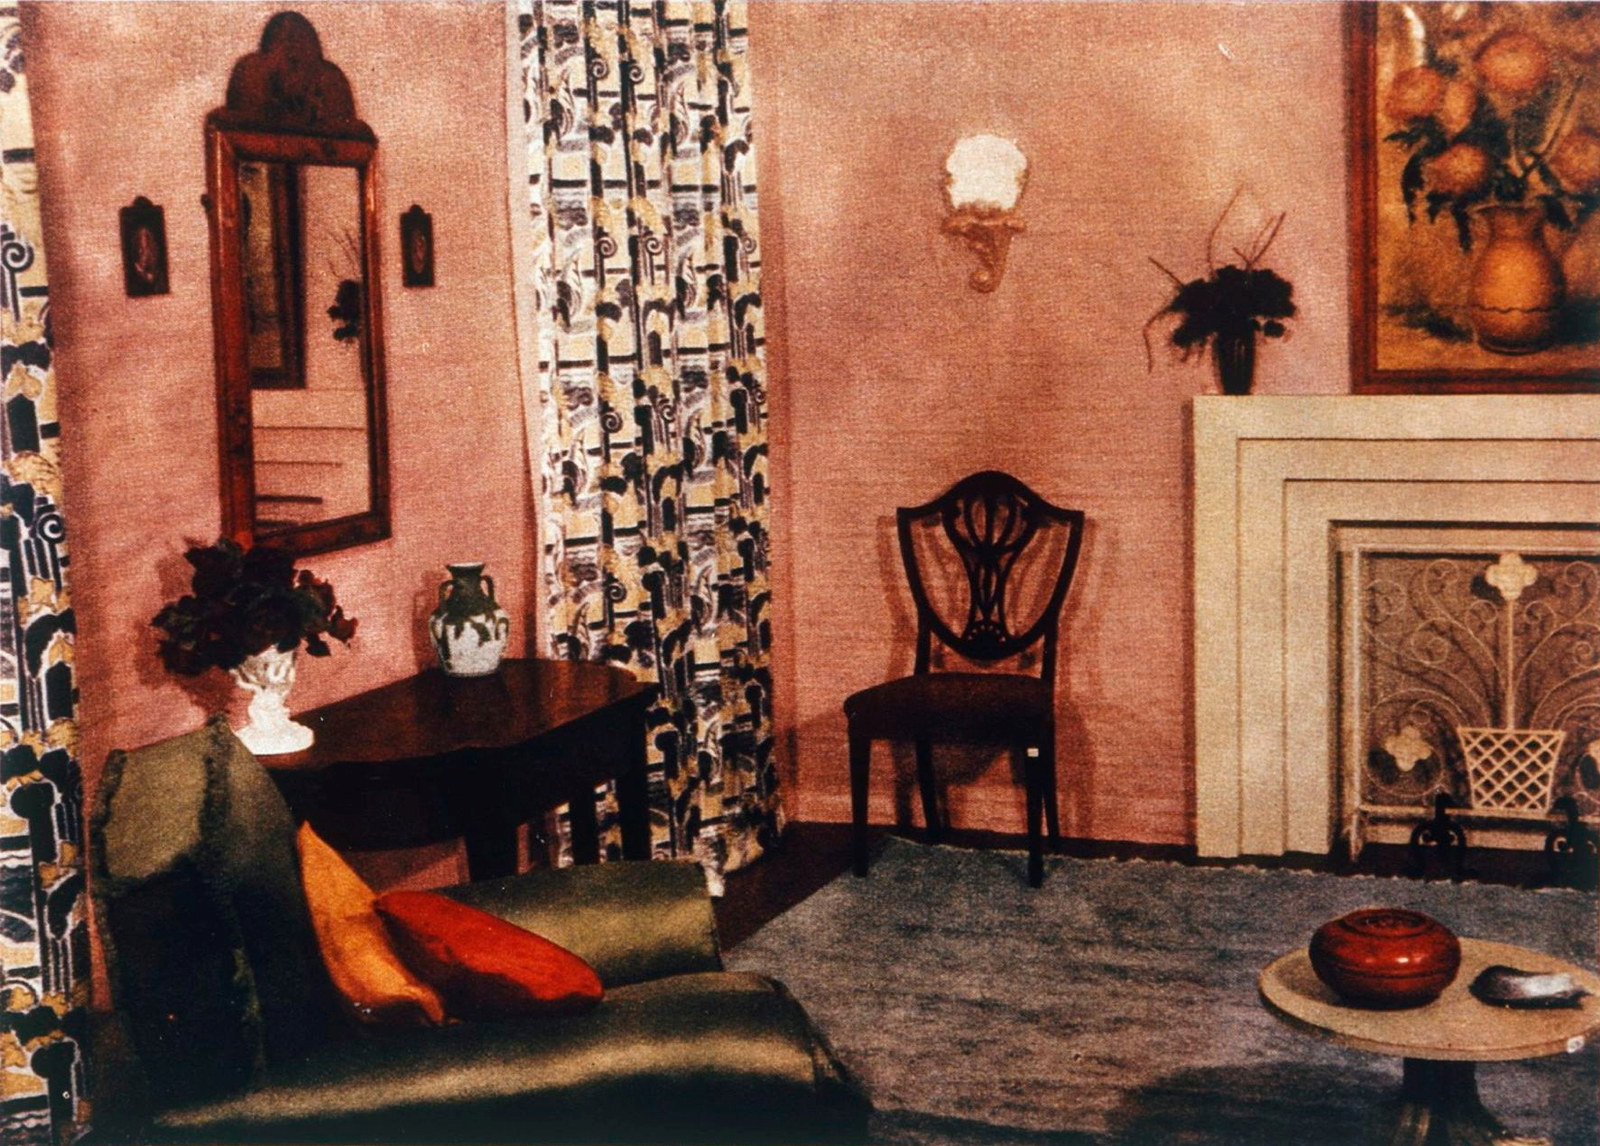 'Classic modern room' from exhibition 'An Englishman's Home, 1941', published in The Home, July 1941